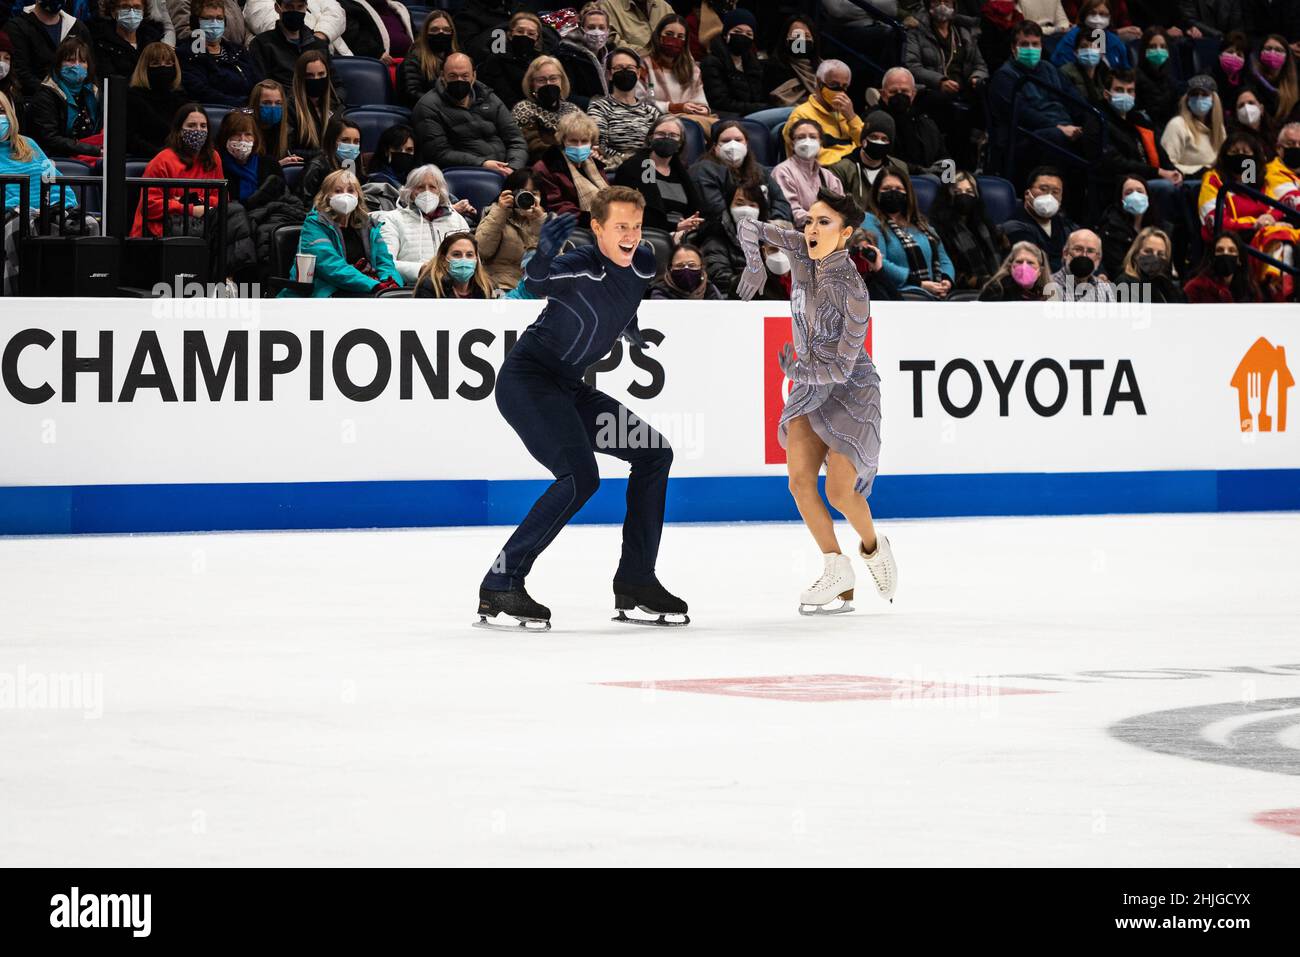 Madison Chock and Evan Bates compete in the dance free skate that helped them win the gold medal at the U.S. National Figure Skating Championships.. Stock Photo